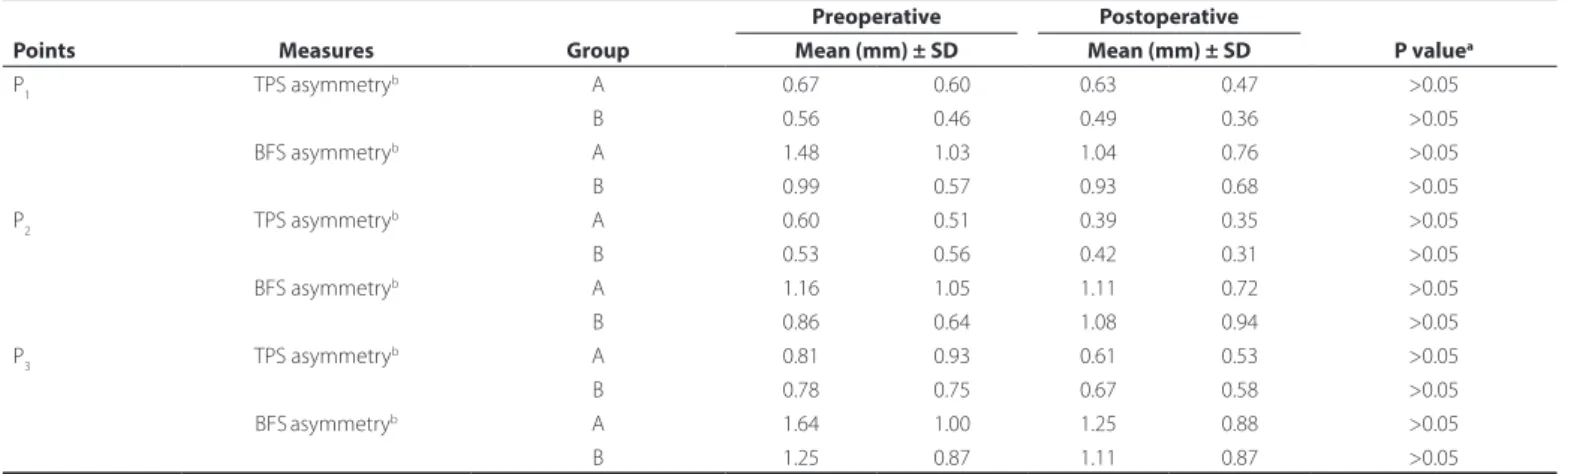 Table 2. Outcome change in TPS and BFS between groups and location